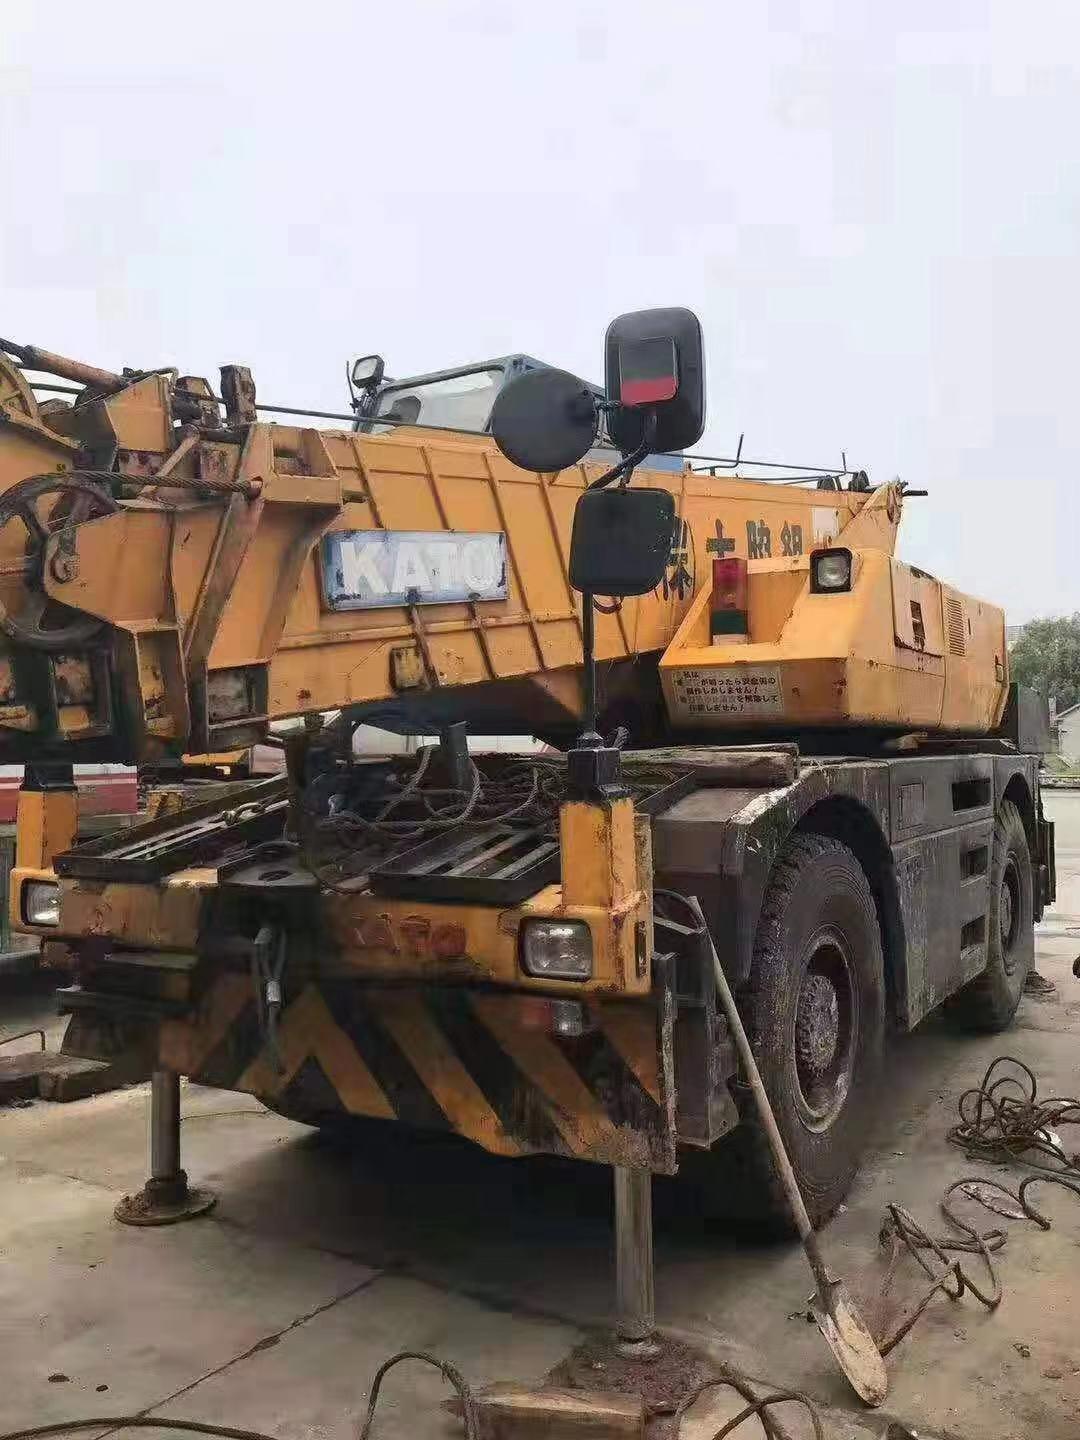 
                Used Kato 25t Rough Terrain Crane with Good Condition for Hot Sale
            